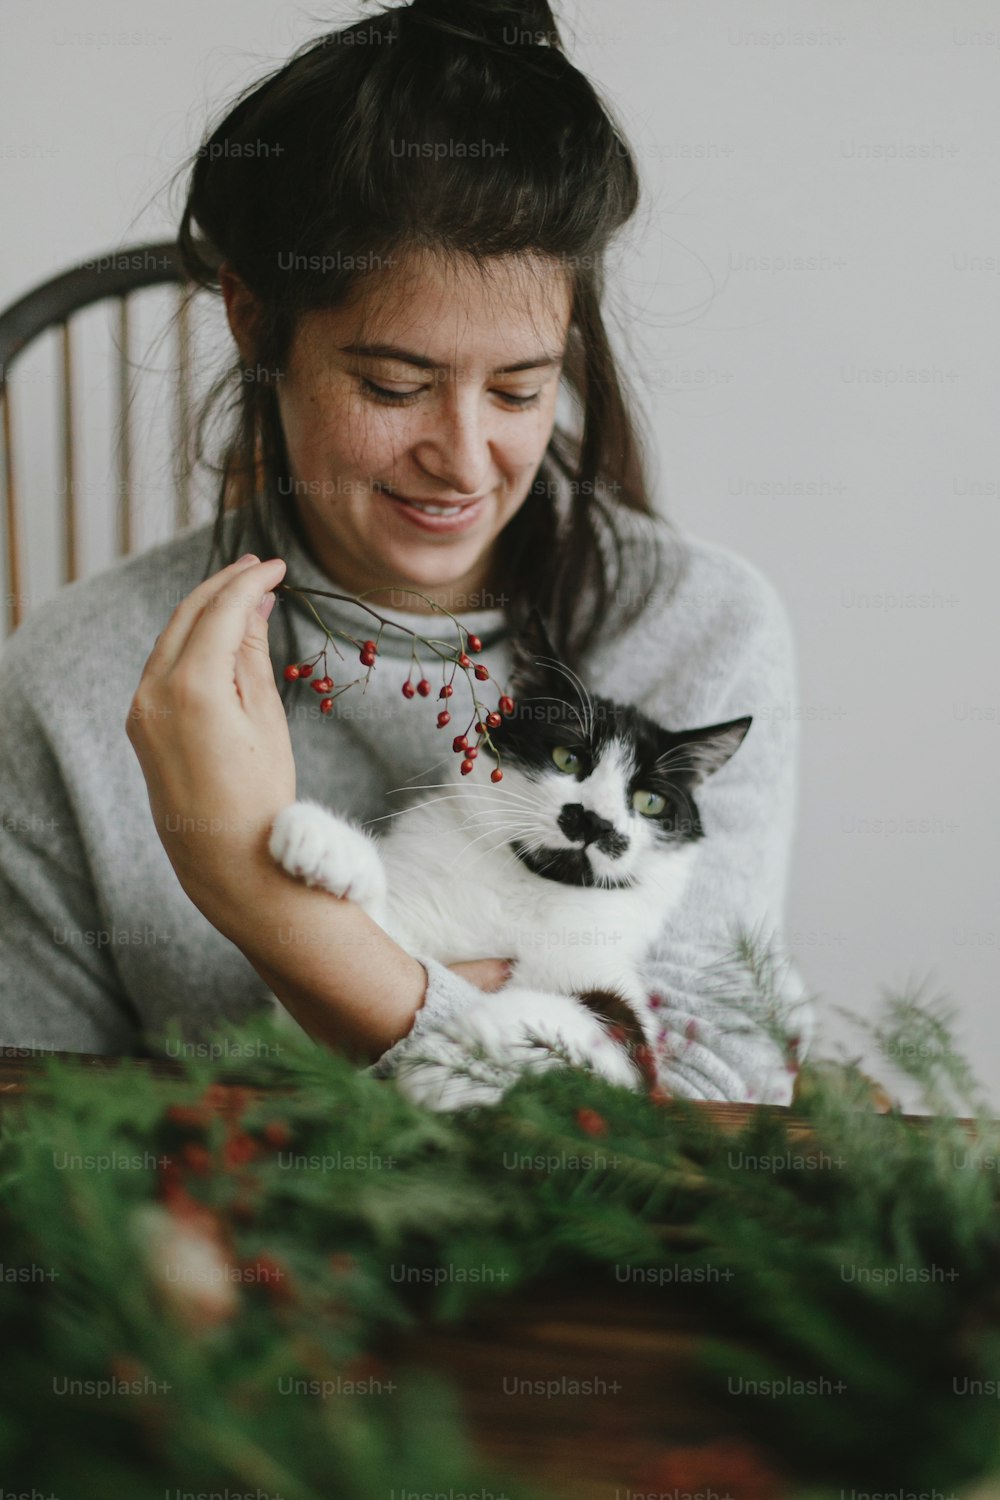 Making christmas wreath with cute cat at home, holiday advent. Happy woman making christmas wreath with adorable feline helper, holding red berries and green branches. Stylish authentic image